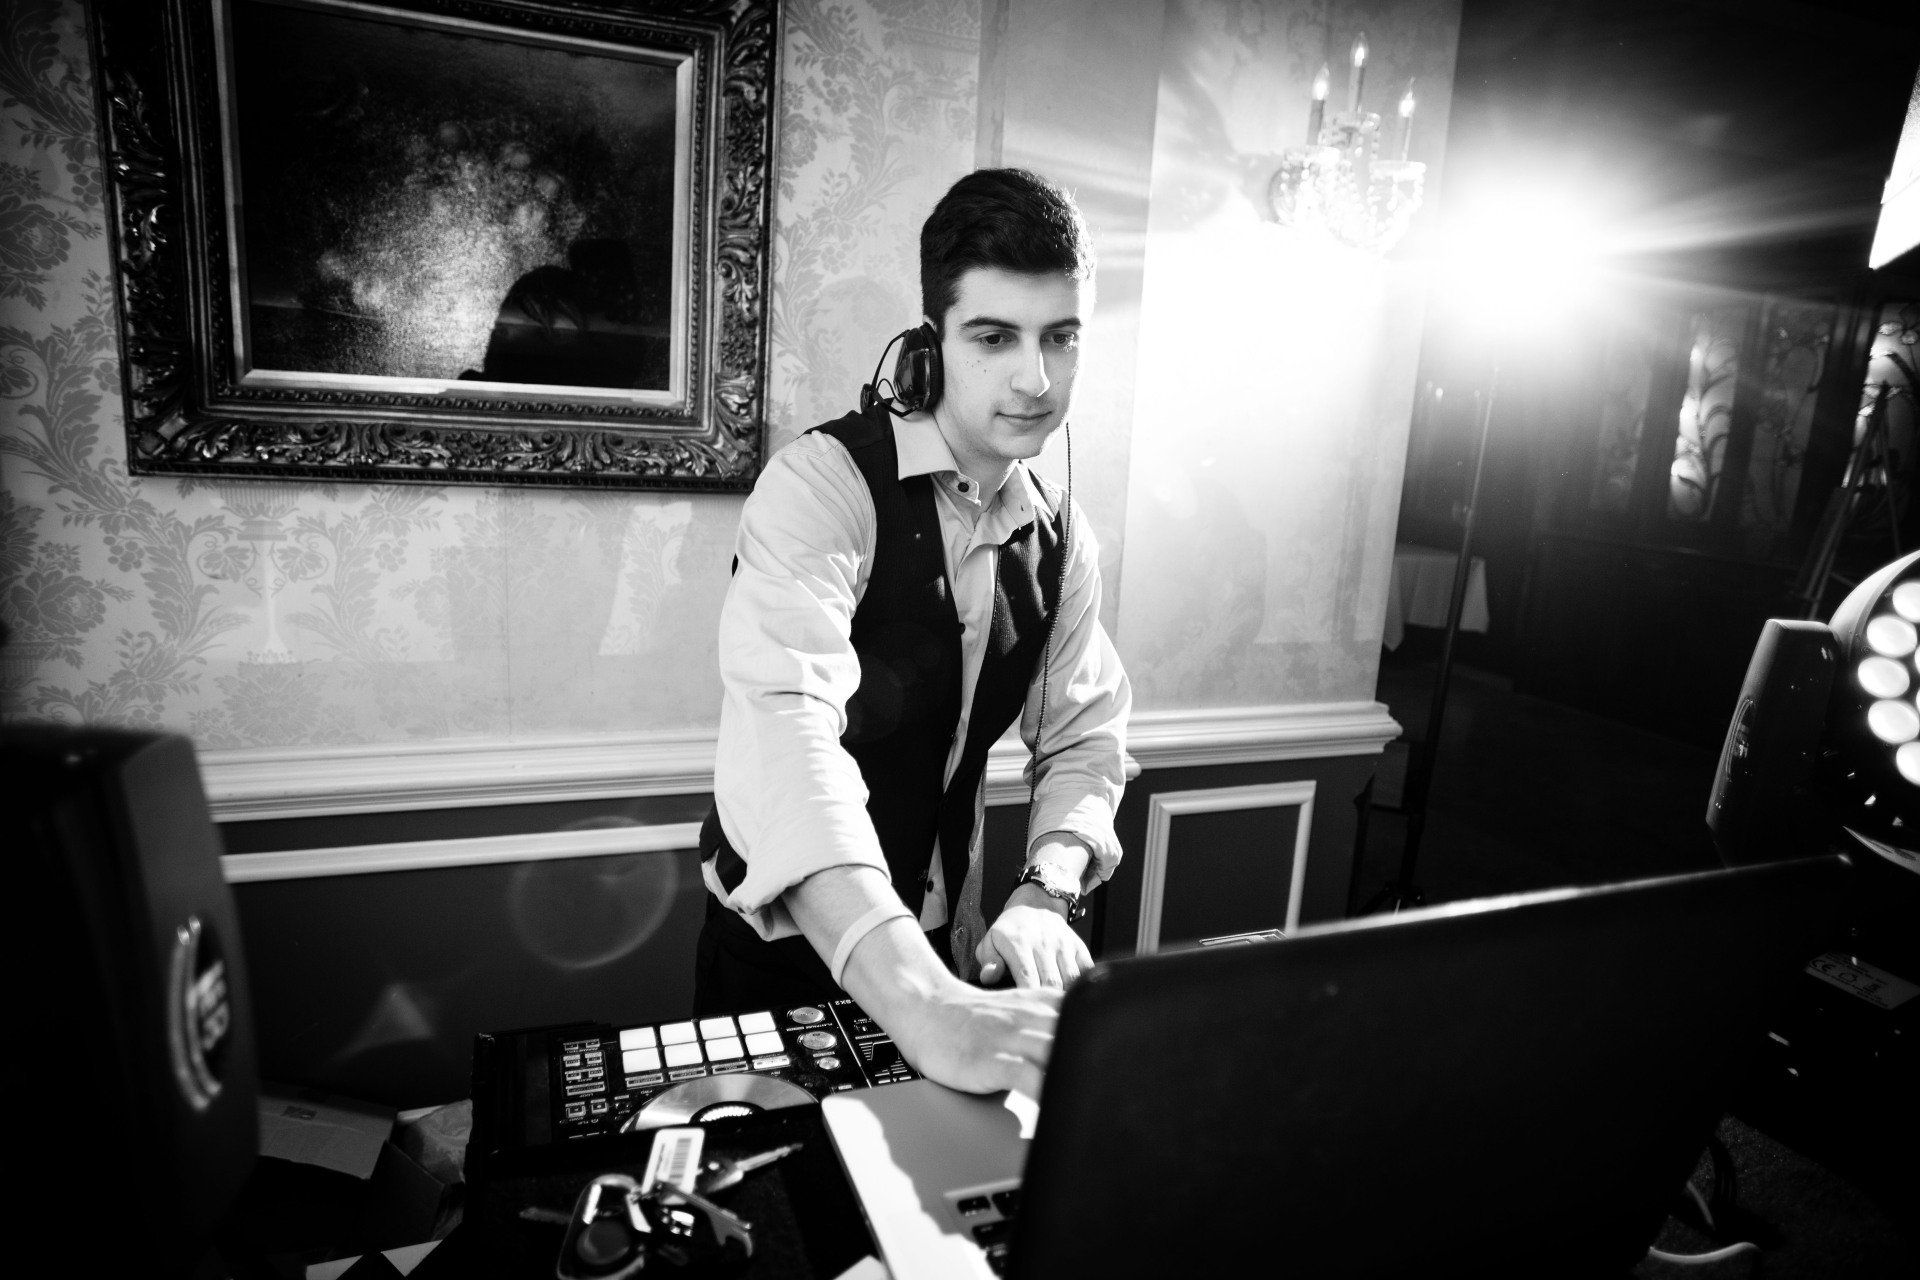 DJ mixing music for a wedding party using turntables